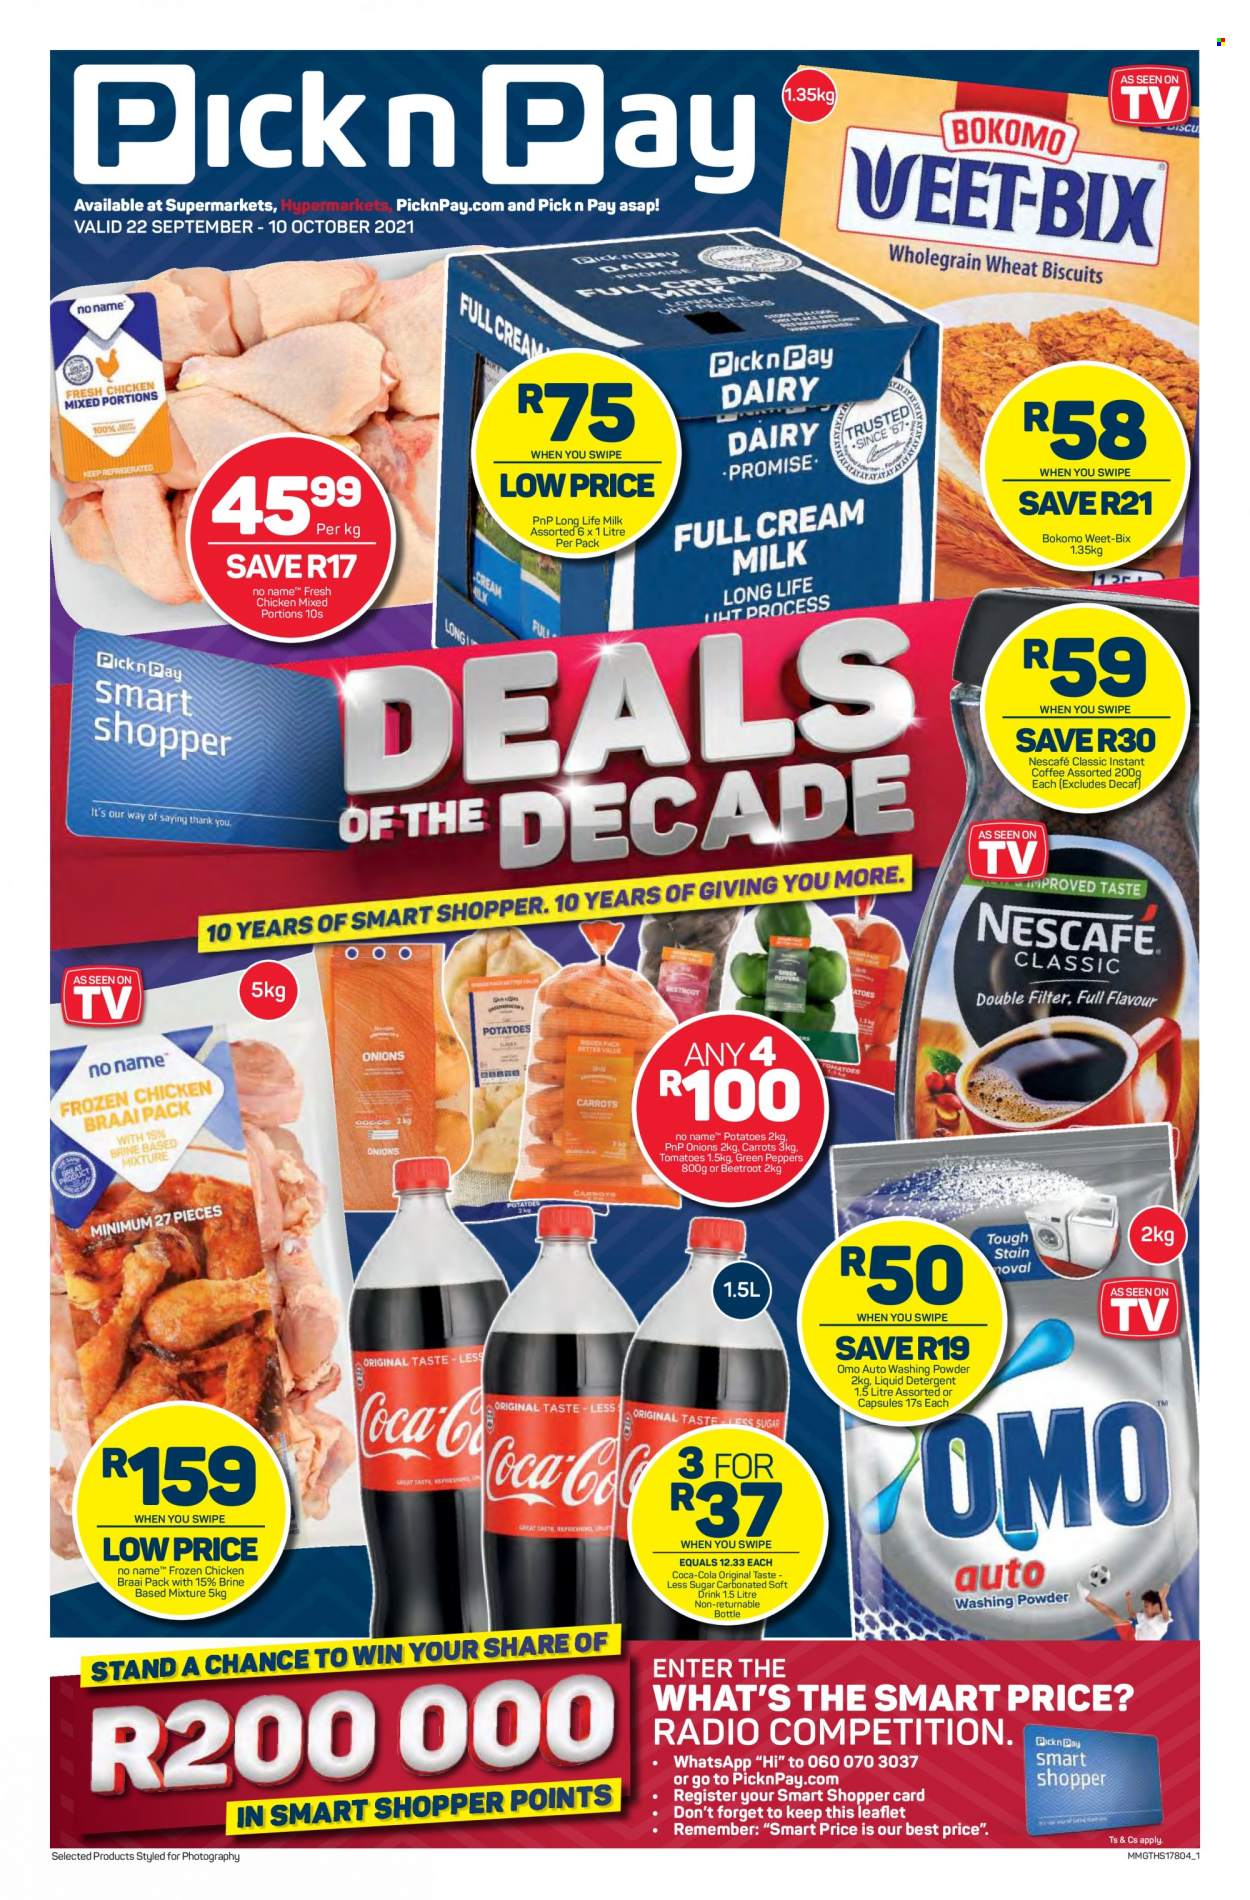 Pick n Pay specials - 09.22.2021 - 10.10.2021. 